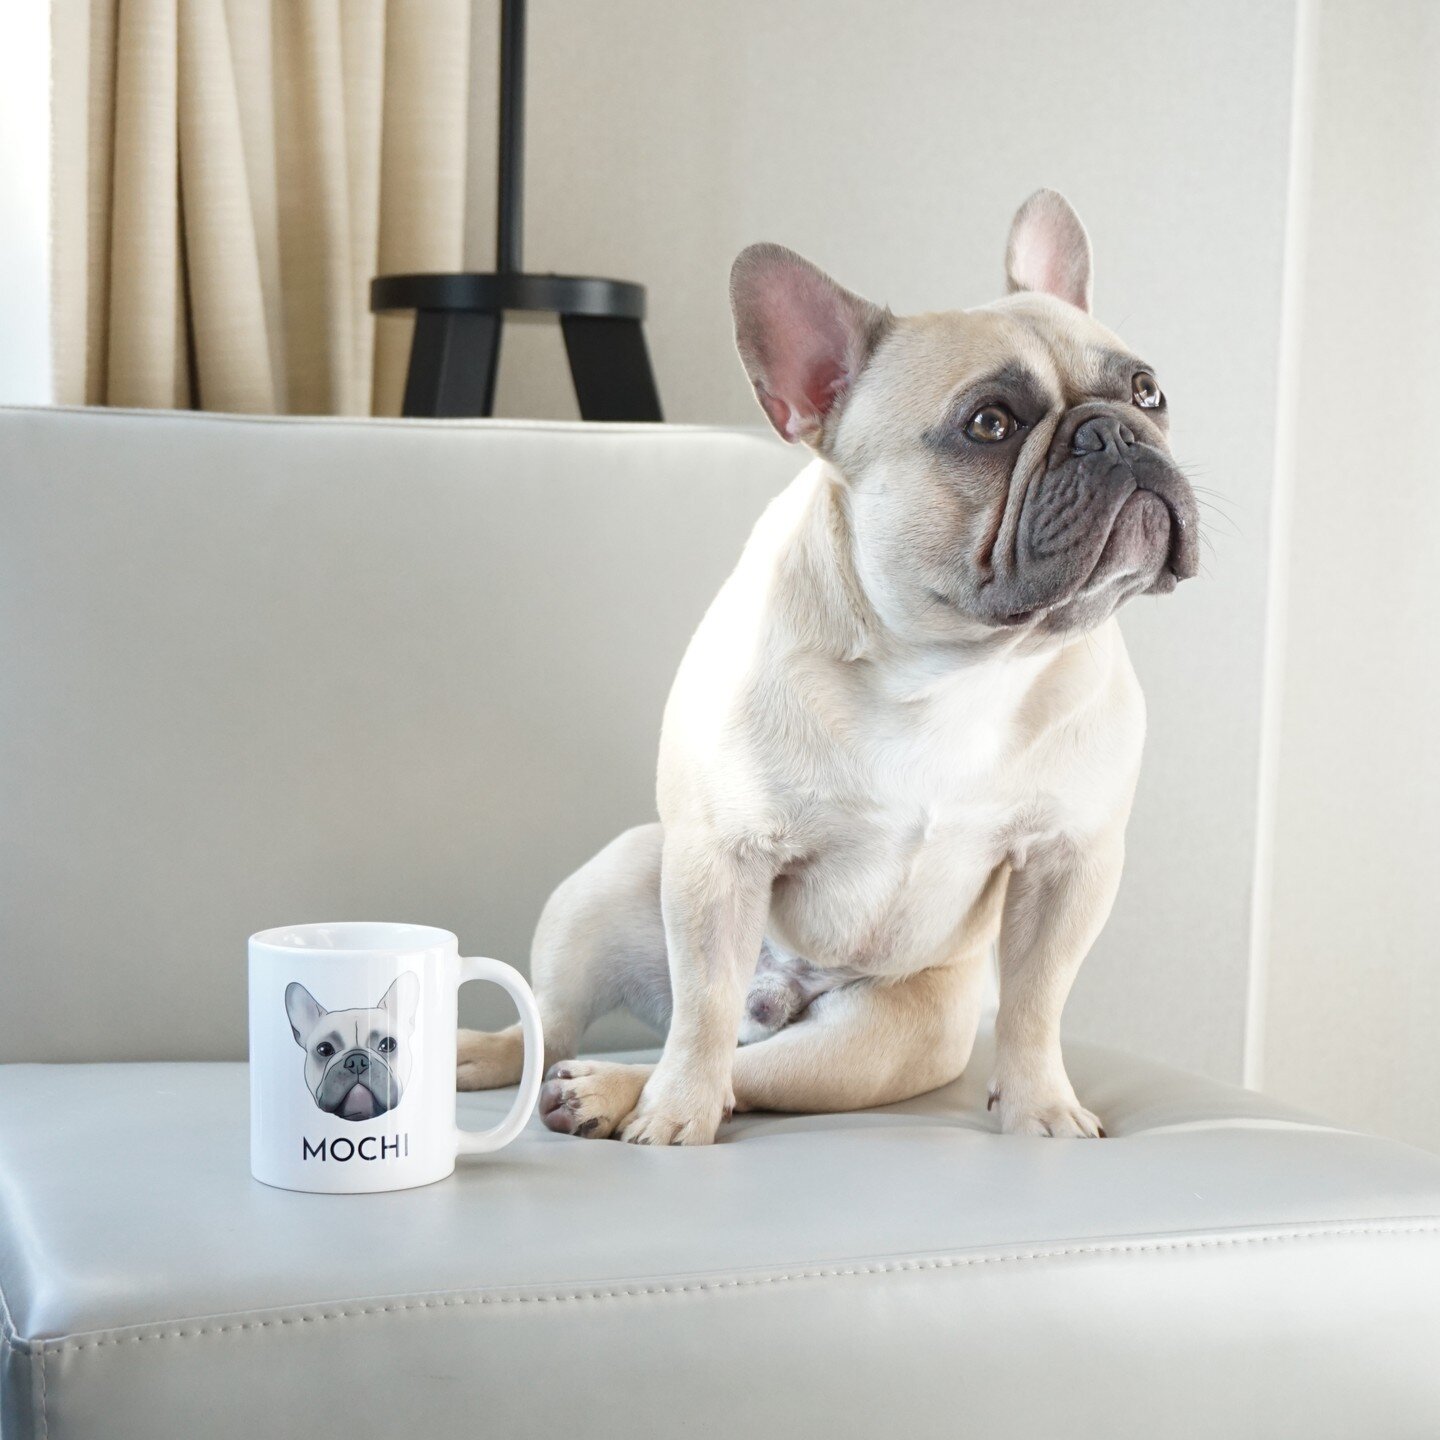 The most beautiful things in the world cannot be seen or touched... at least not by pups apparently😉🐕️⁠
⁠
Get the most beautiful mug around at the link in our bio (warning: its customizable option might just be TOO cute to handle)